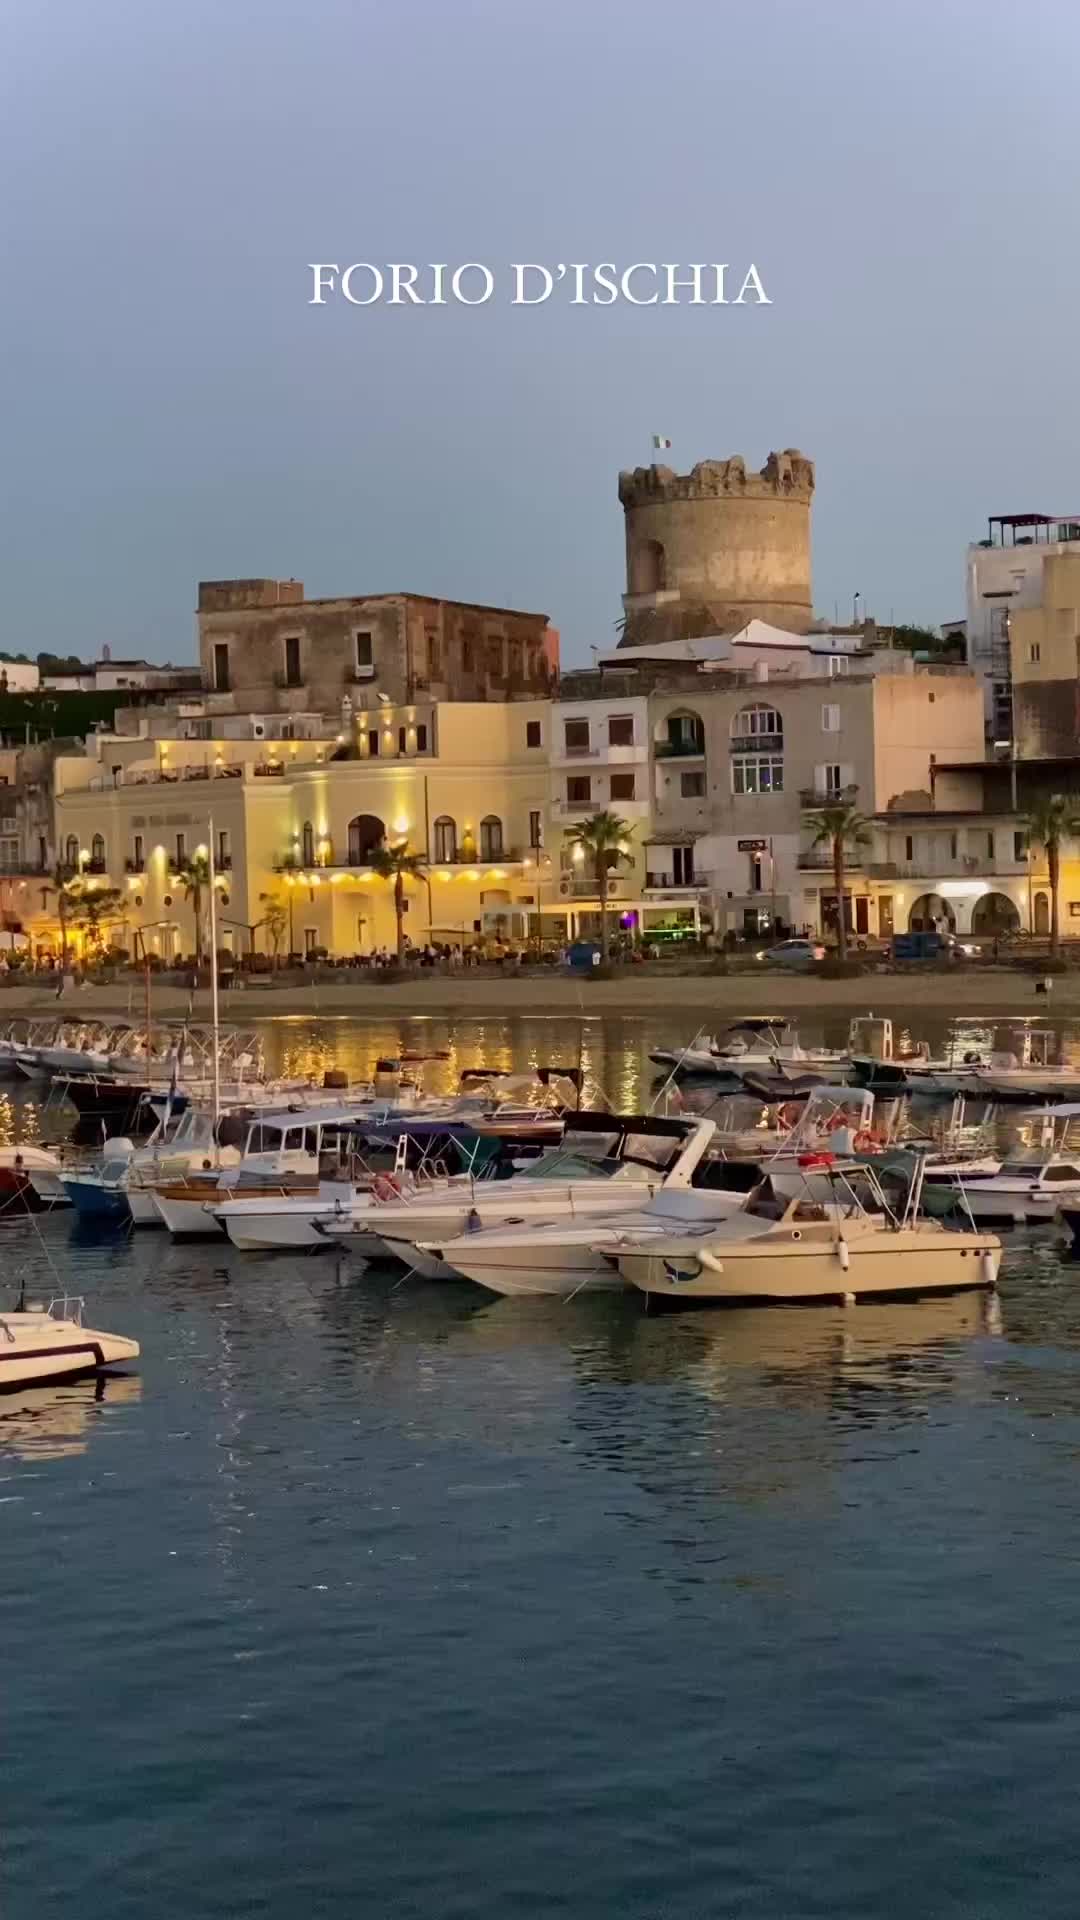 Stunning Sunset in Forio, Ischia - A Love Story